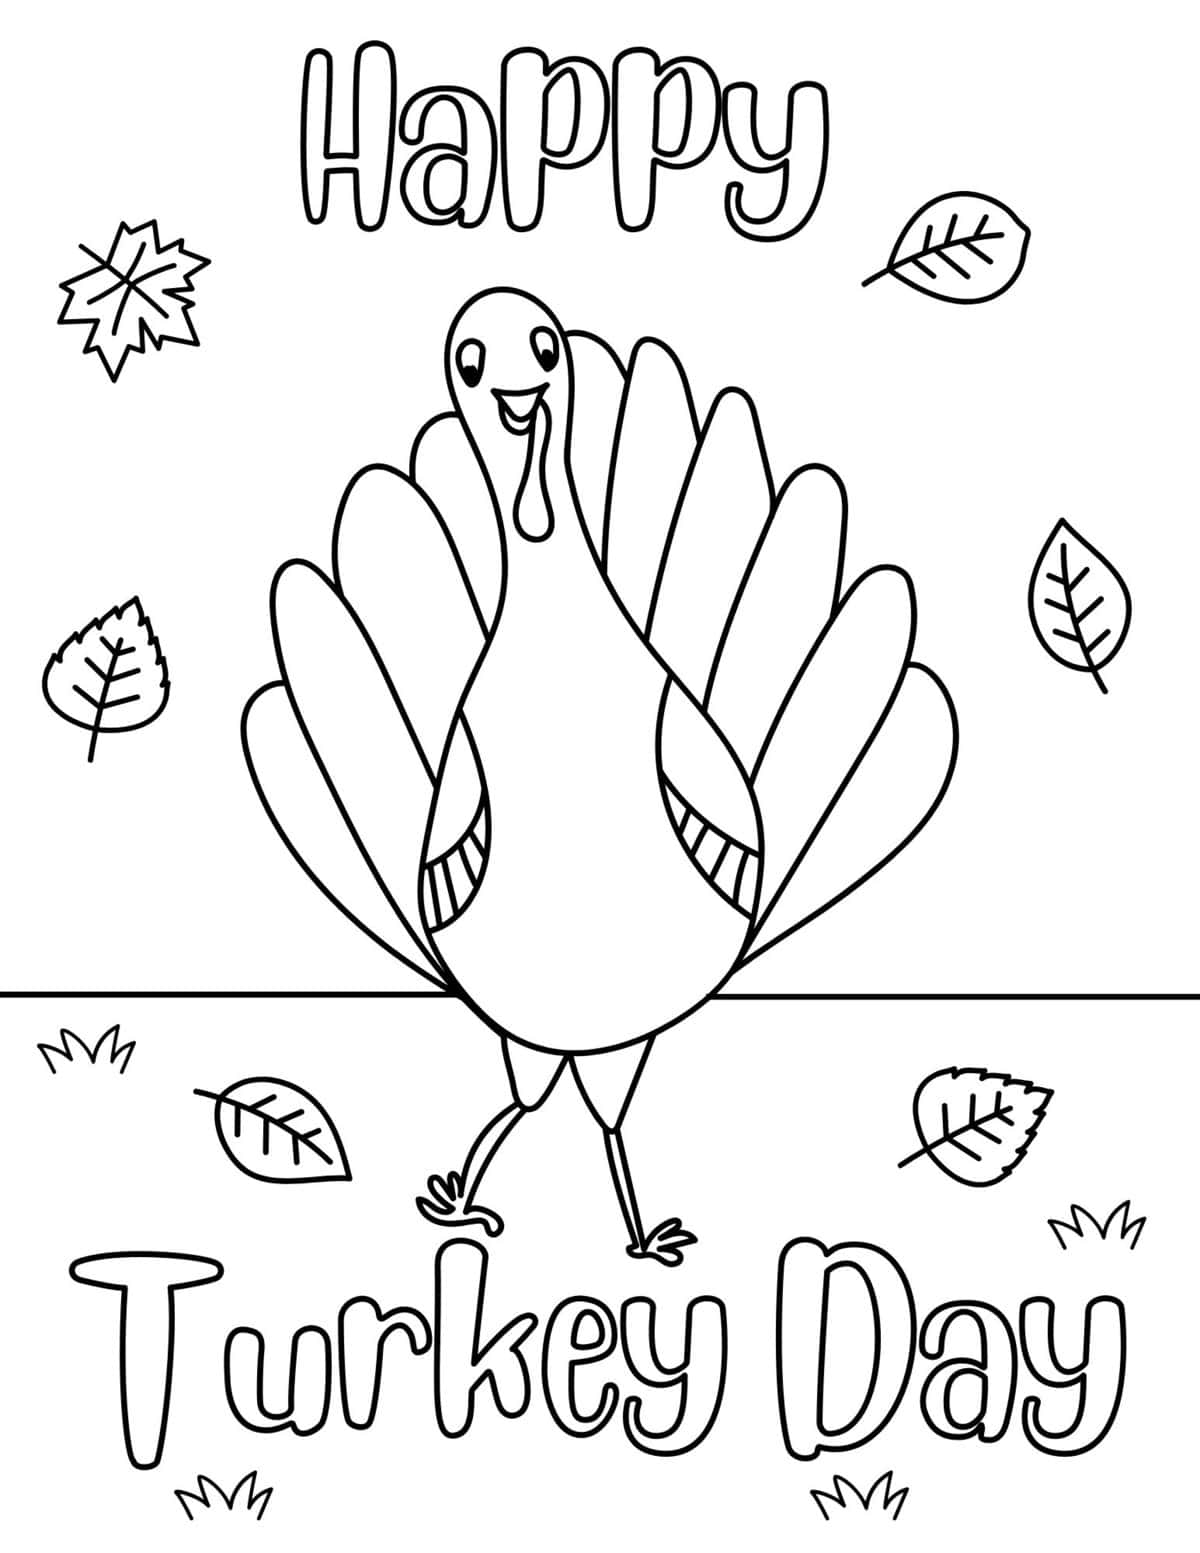 happy turkey day coloring sheet